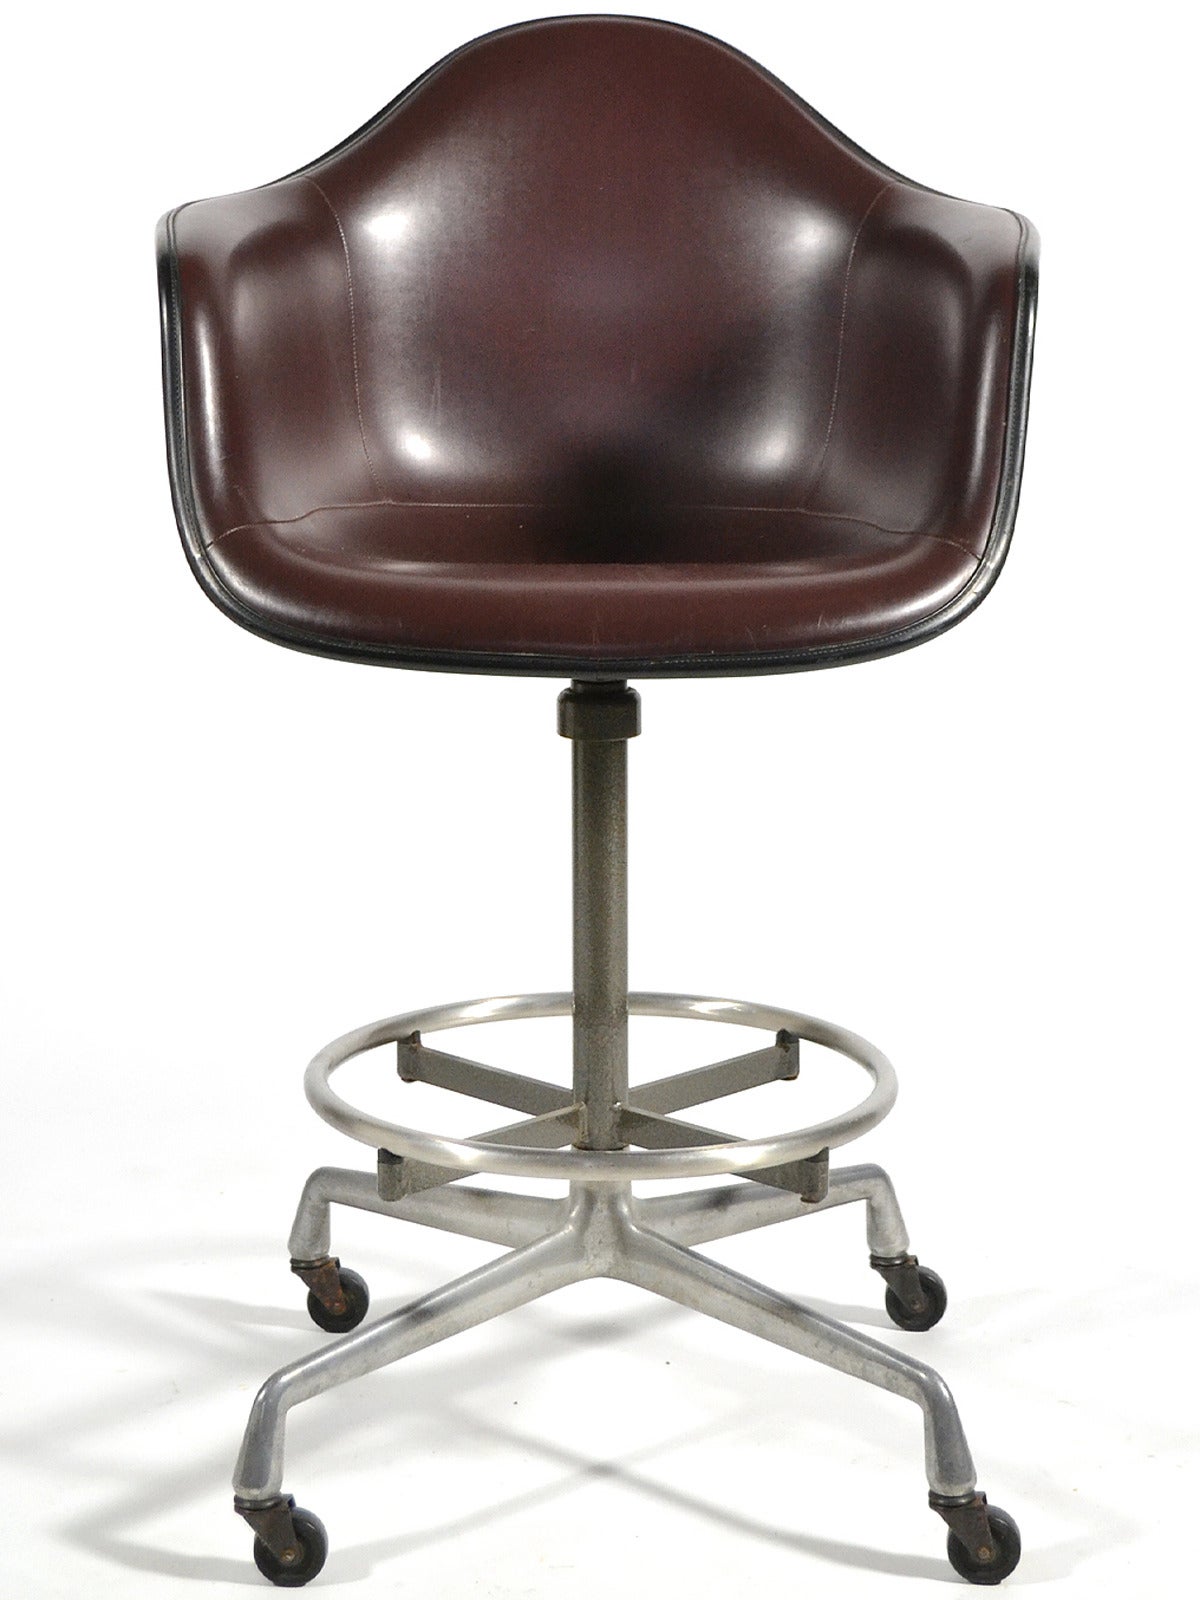 This Eames armchair features the uncommon drafting height base which has swivel function, adjustable height, and rolls on smooth casters. The armshell is of elephant hide gray fiberglass, with chocolate brown Naugahyde and black edge banding.